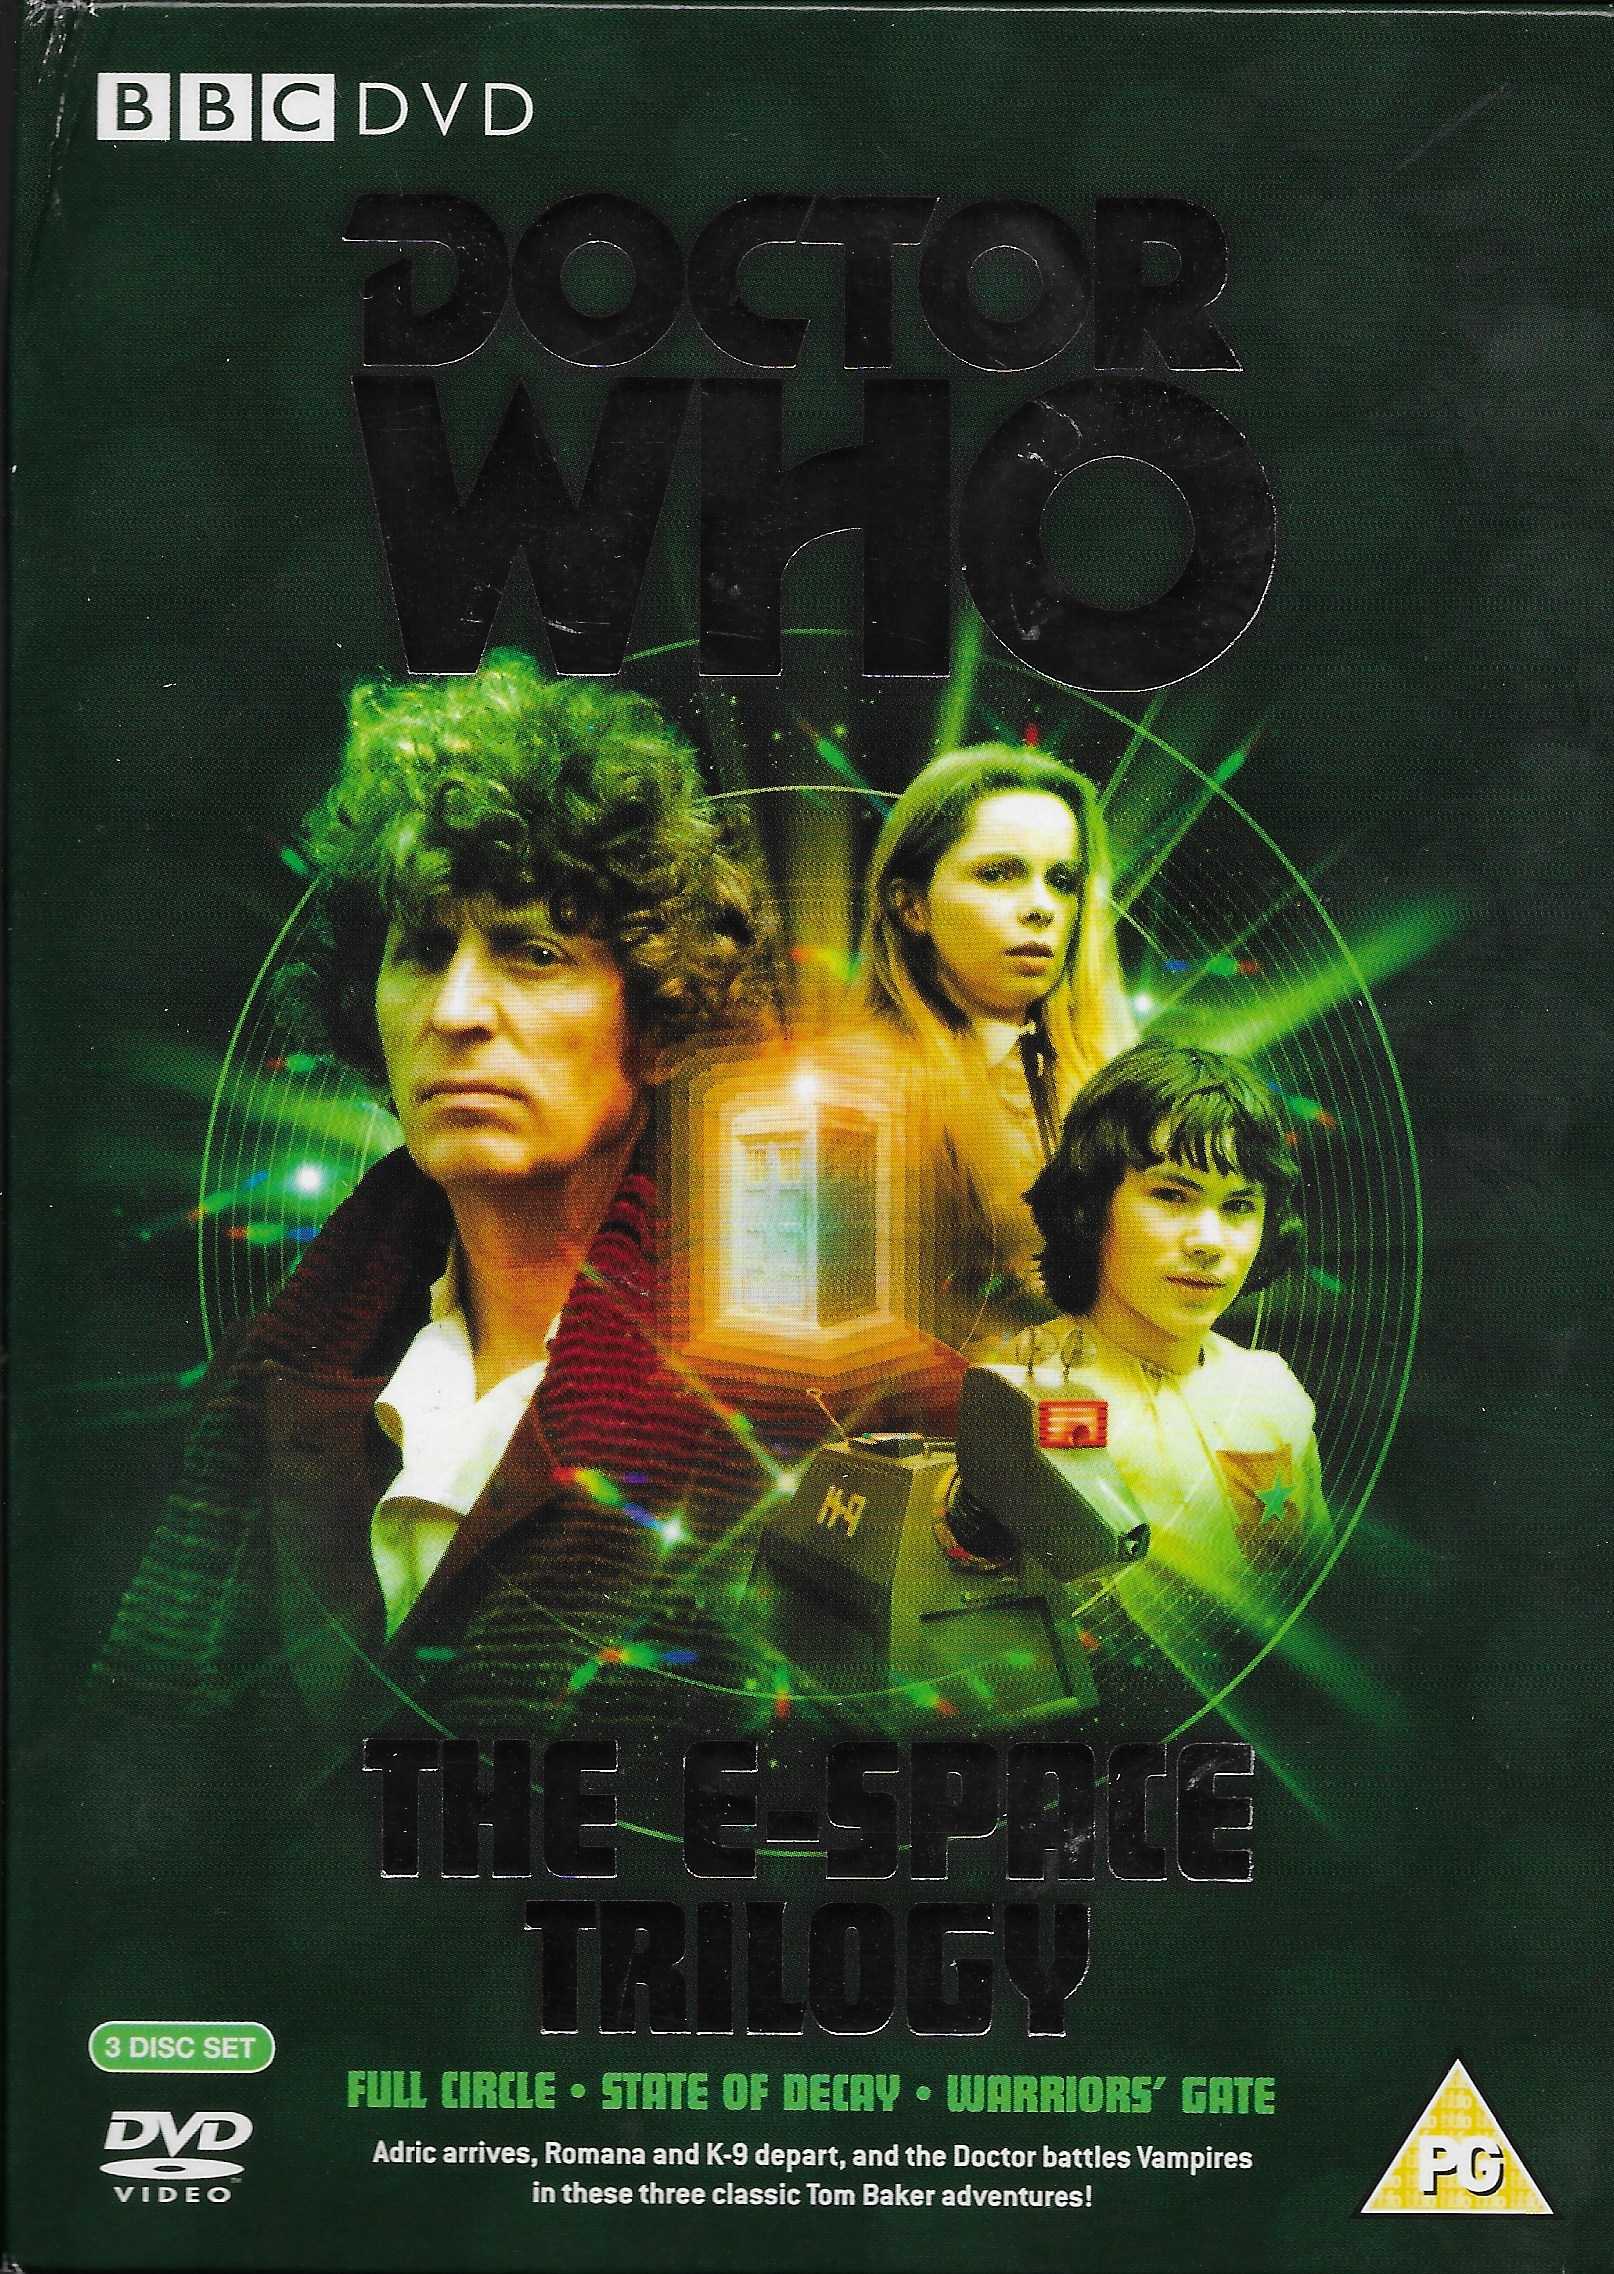 Picture of BBCDVD 1835 Doctor Who - The e-Space trilogy by artist Andrew Smith / Terrence Dicks / Steve Gallagher from the BBC dvds - Records and Tapes library